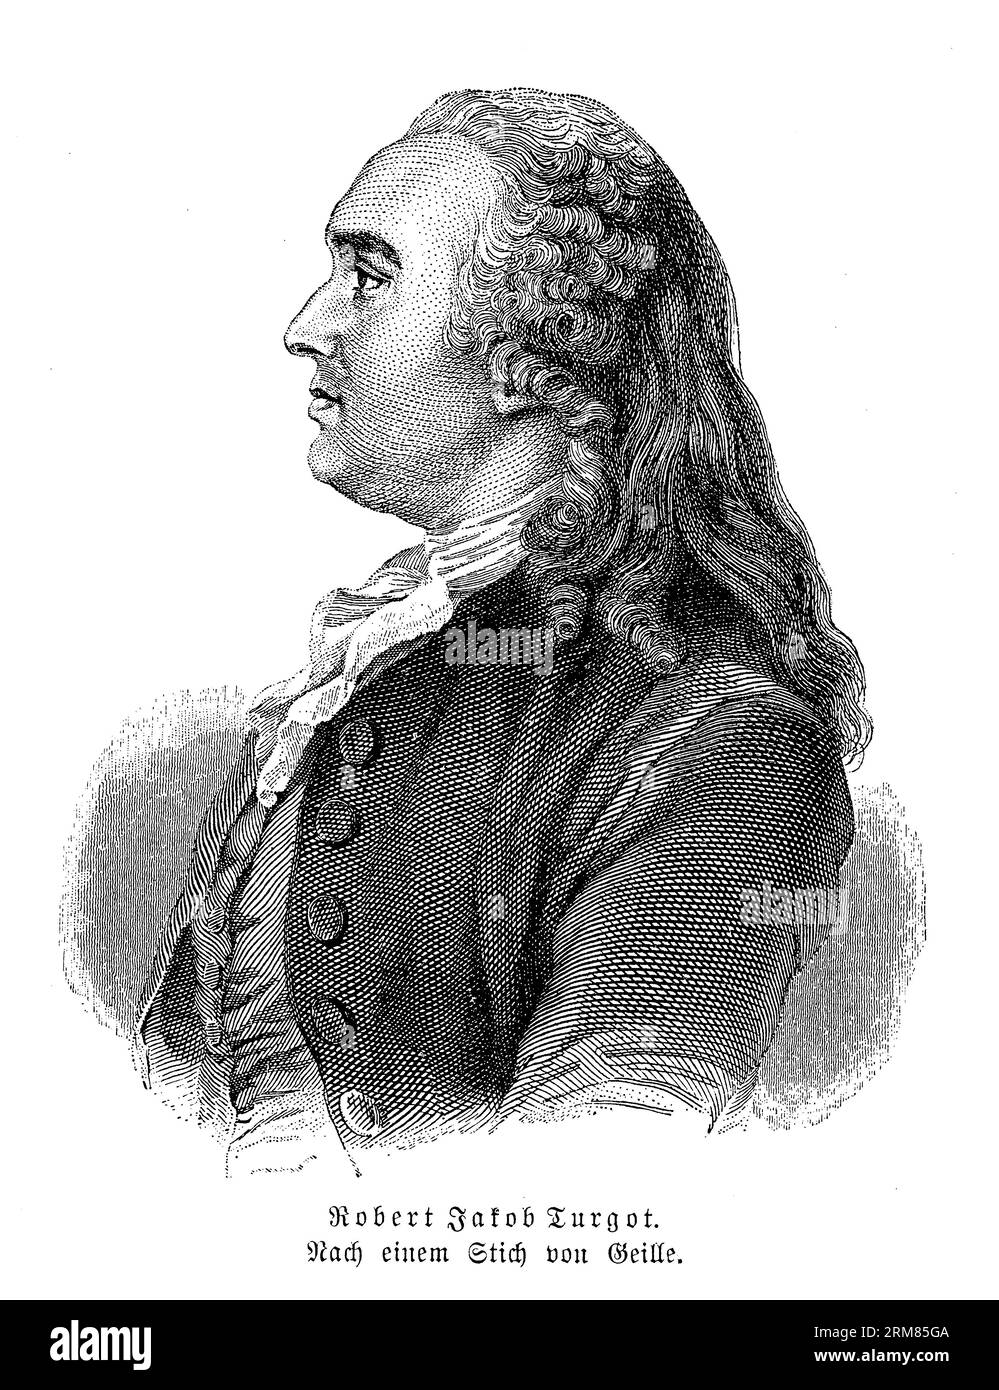 Anne-Robert-Jacques Turgot, commonly known as Turgot was a French economist, statesman, and philosopher who lived from 1727 to 1781. Turgot is renowned for his contributions to economic theory and his role as an influential figure during the reign of King Louis XVI of France Stock Photo